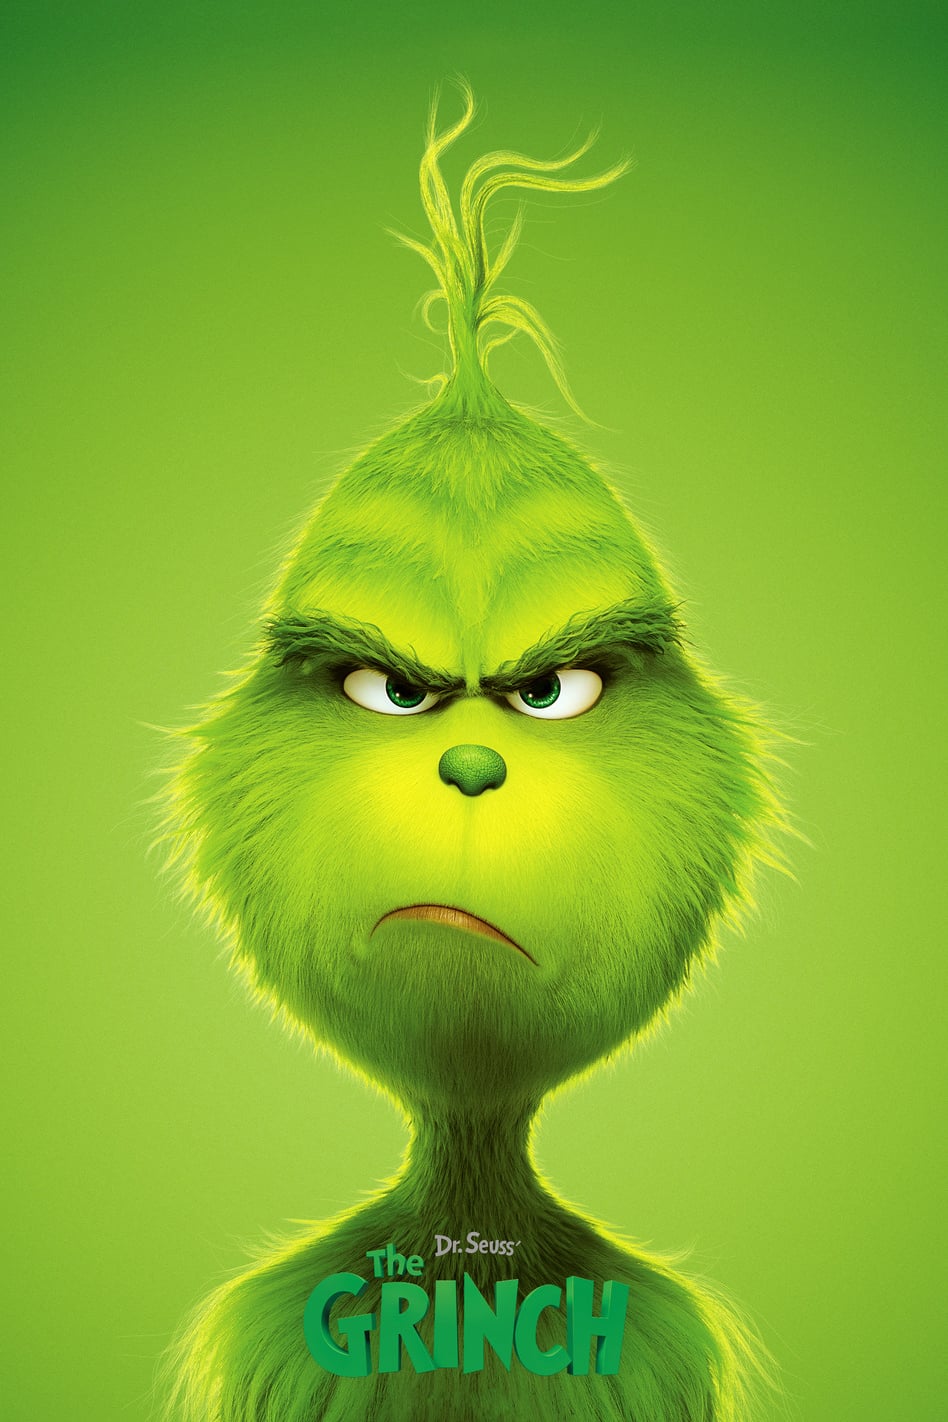 The Grinch (2018) Official Trailer #2